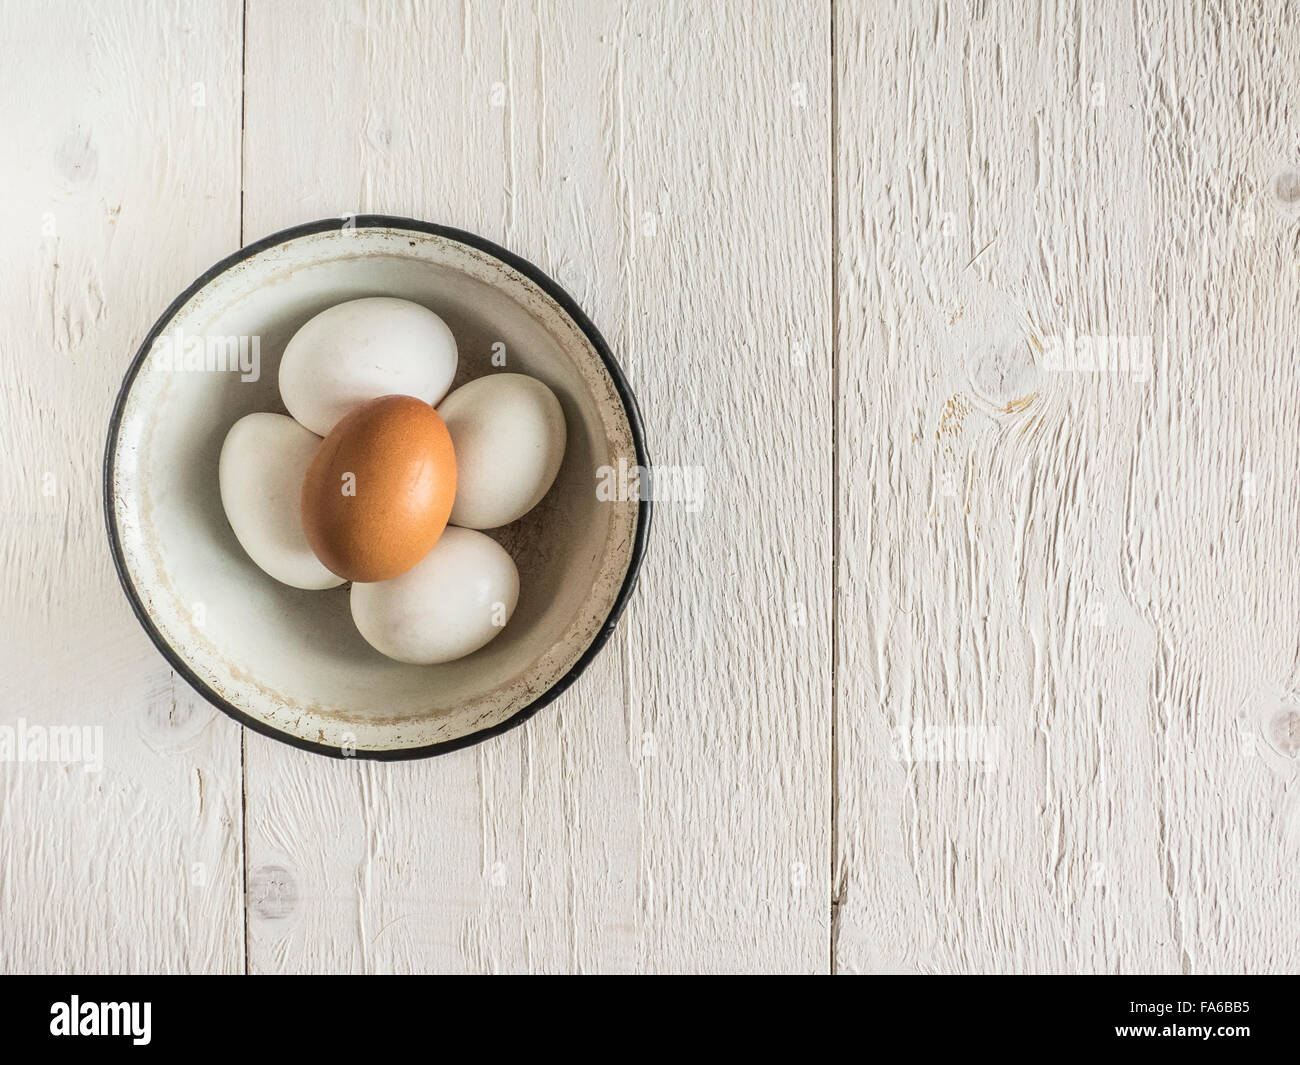 Five eggs in a bowl Stock Photo